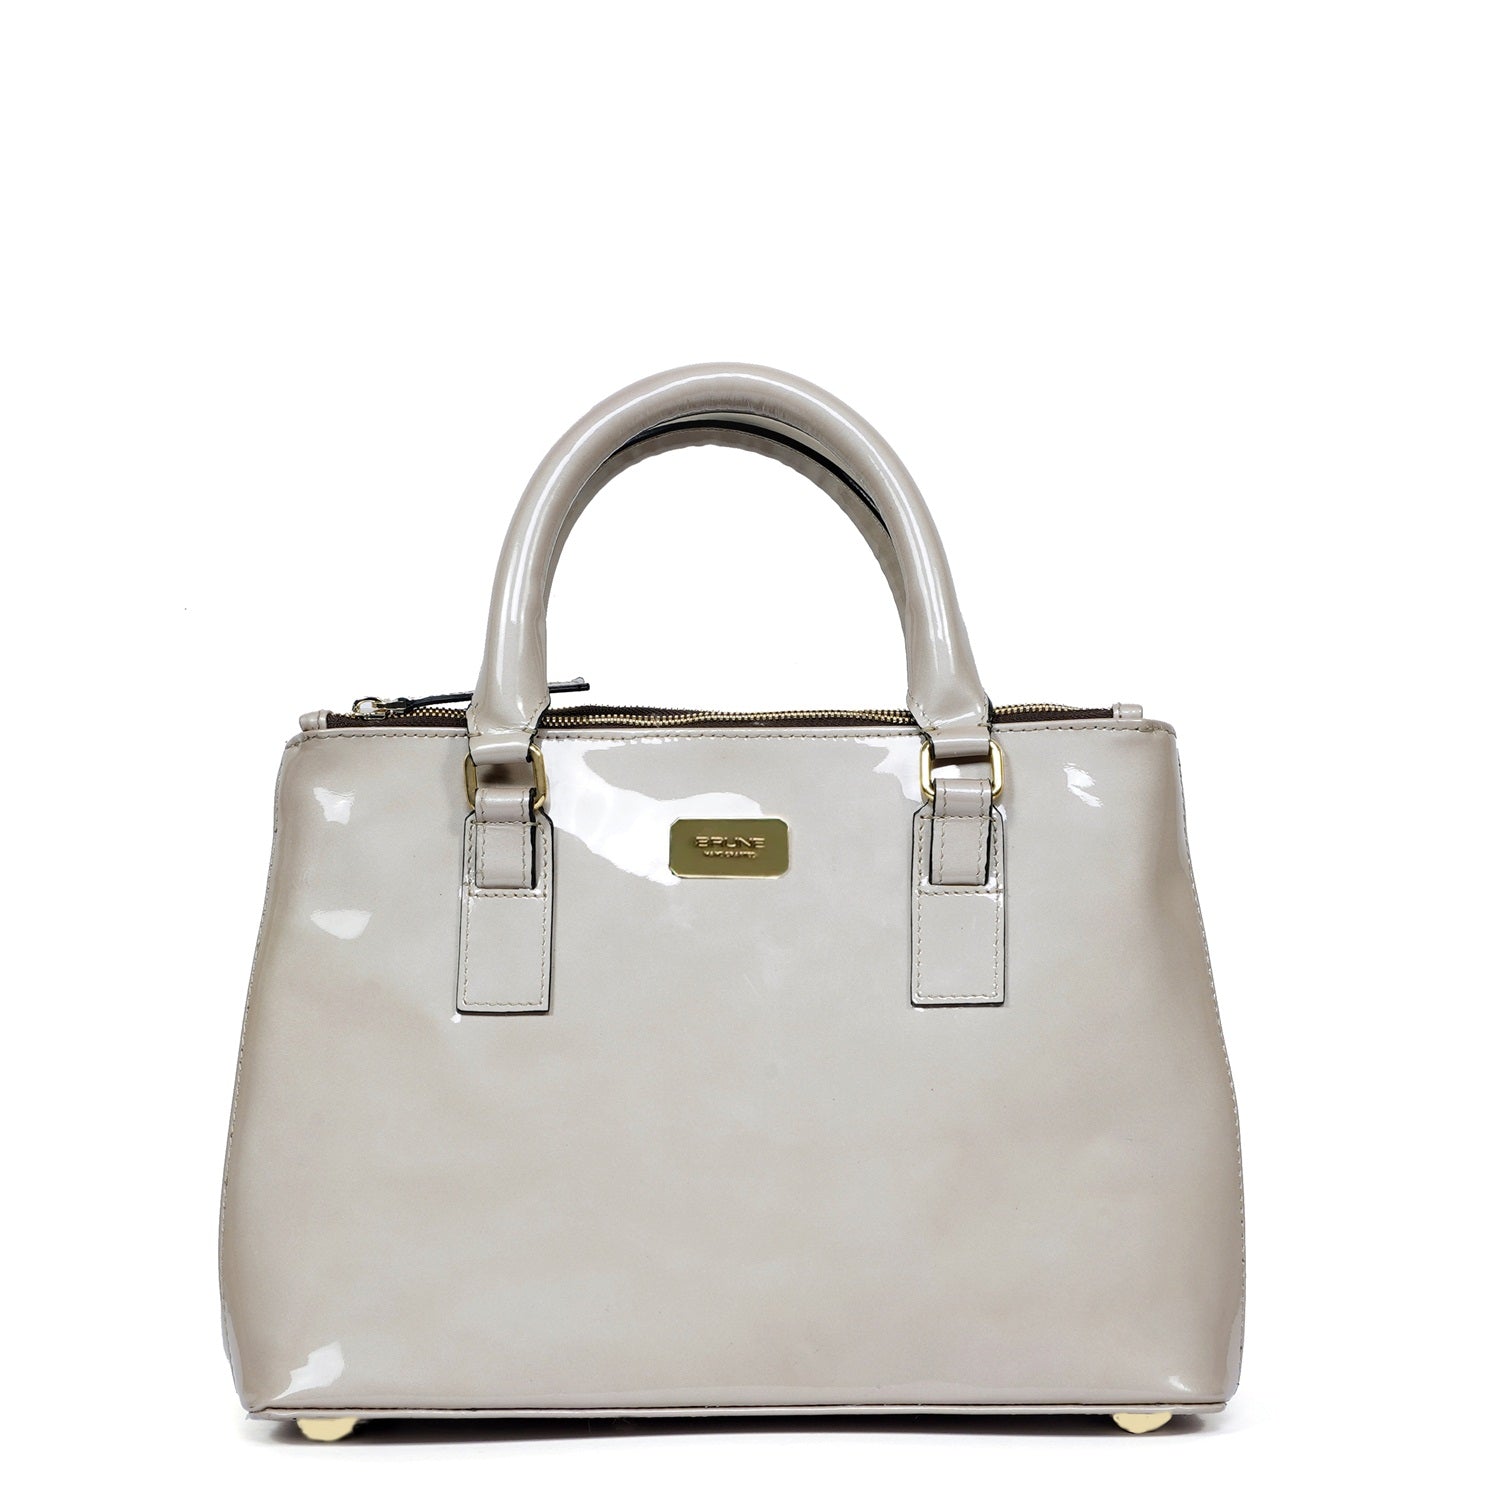 Women Fashion Tote Bag in Patent Beige Leather